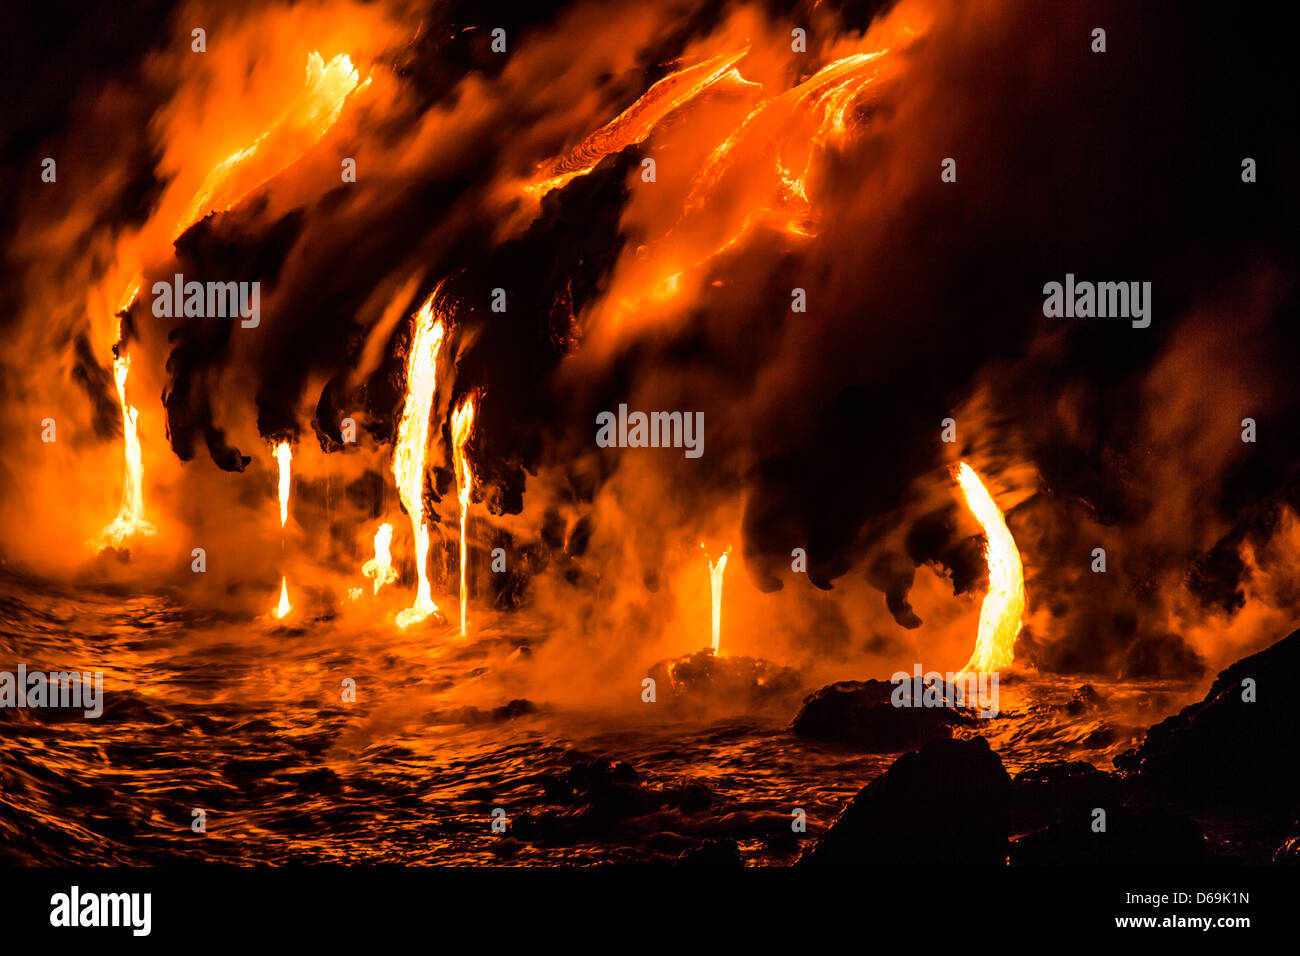 Lava flowing over cliff into water Stock Photo